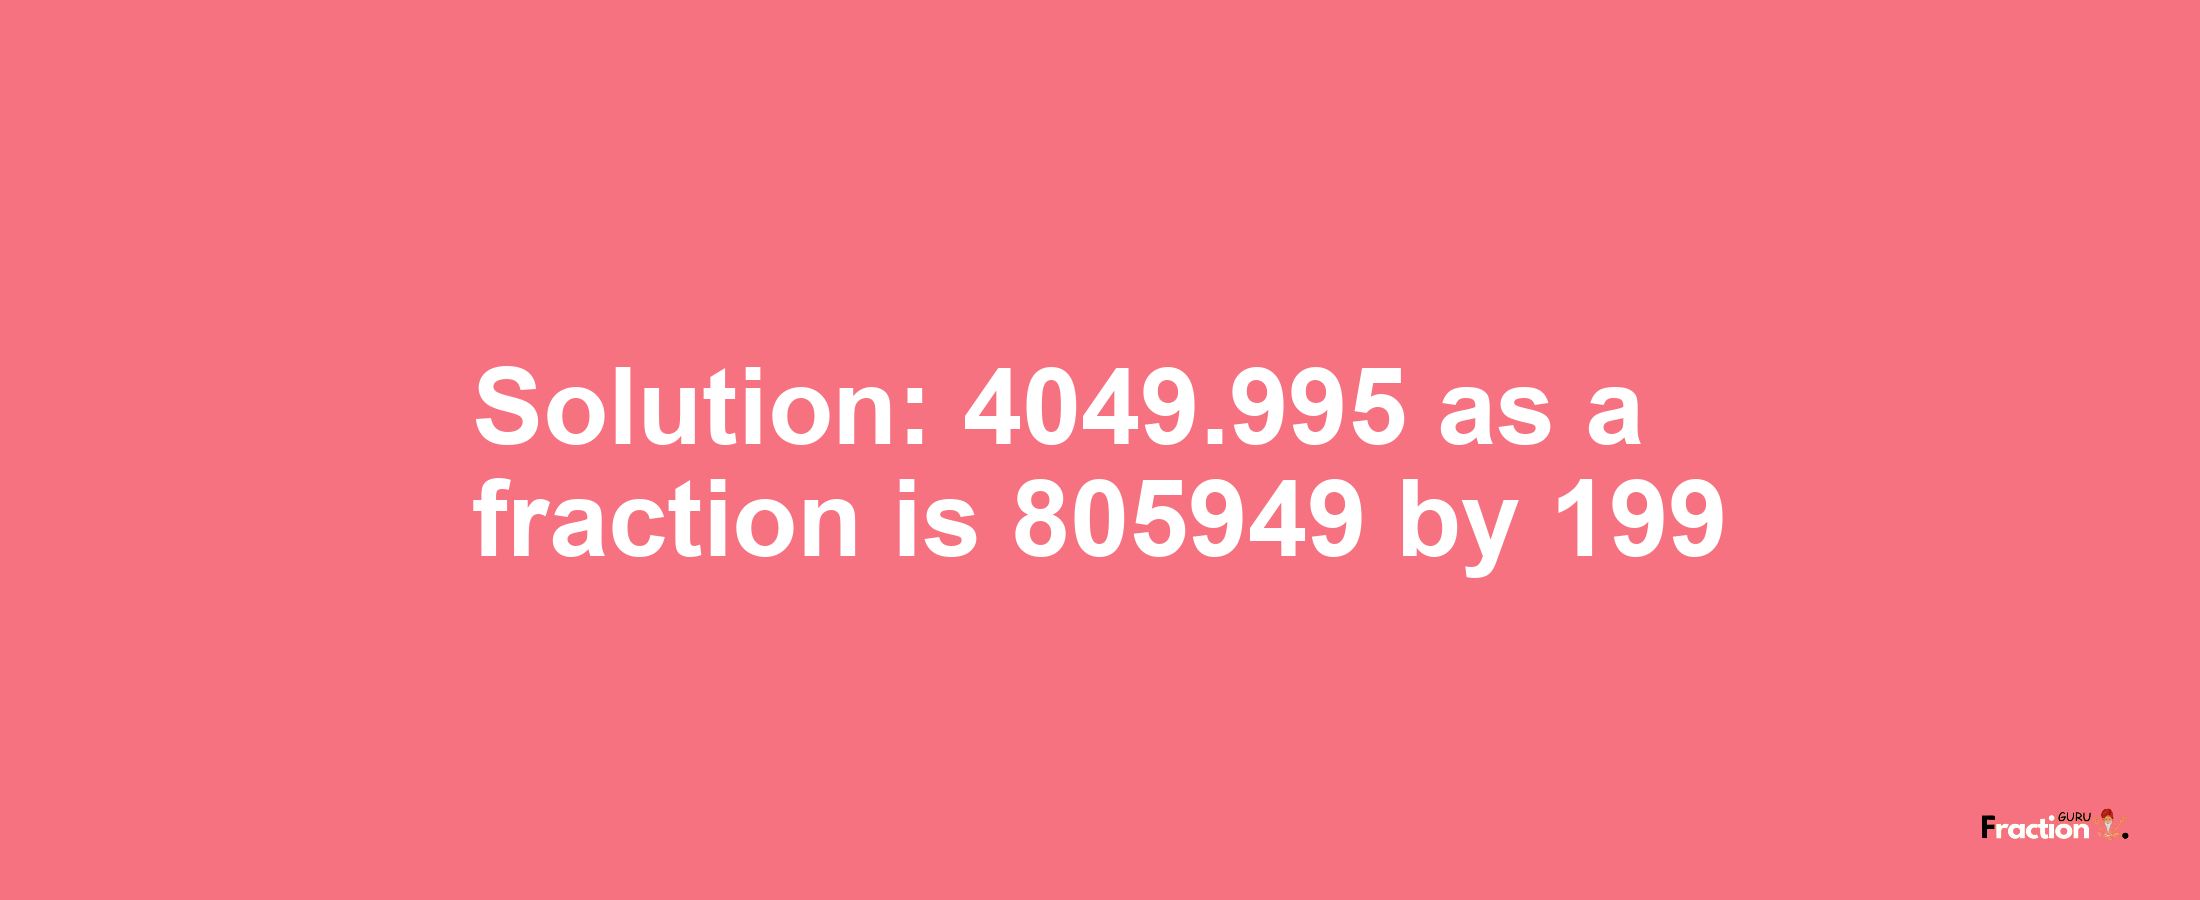 Solution:4049.995 as a fraction is 805949/199